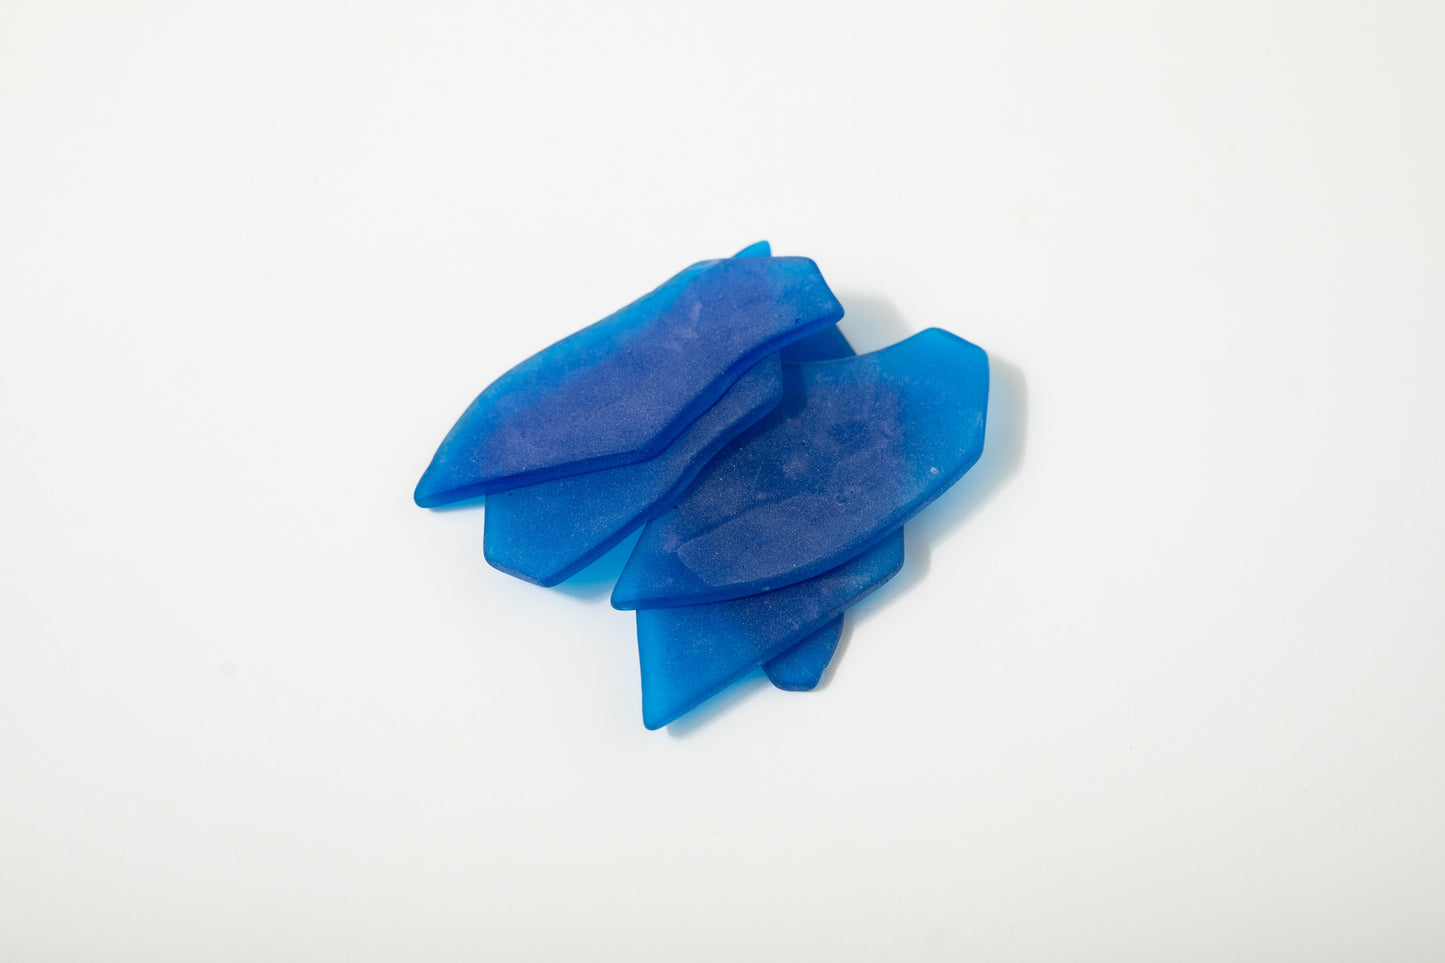 Blue Sea Glass Place Cards - Set of 20 - Irregular Shaped Pieces